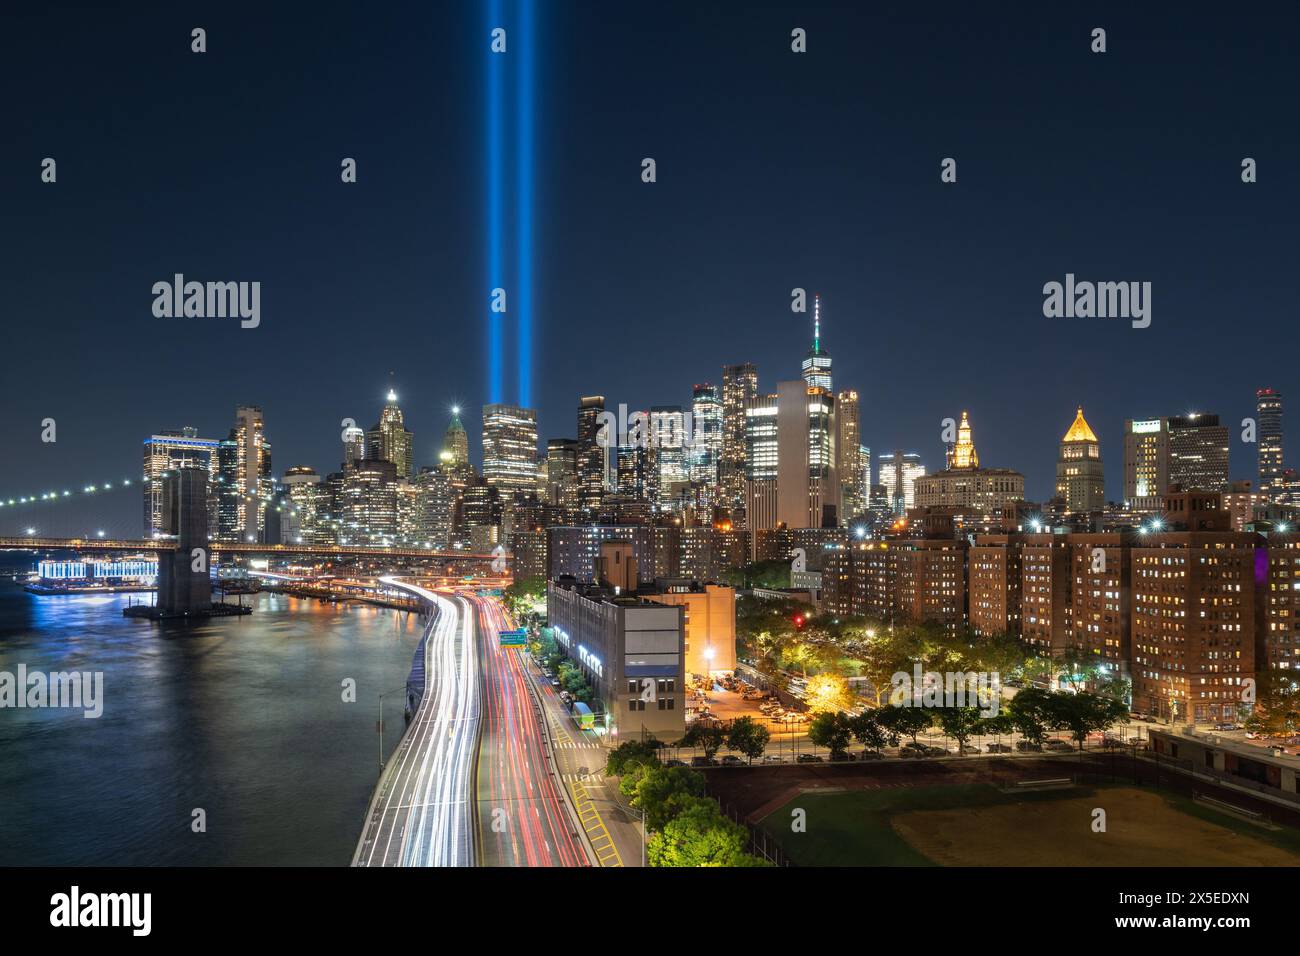 September 11 Tribute in Light with the skycrapers of Lower Manhattan at night. View of Brooklyn Bridge and East River. New York City Stock Photo